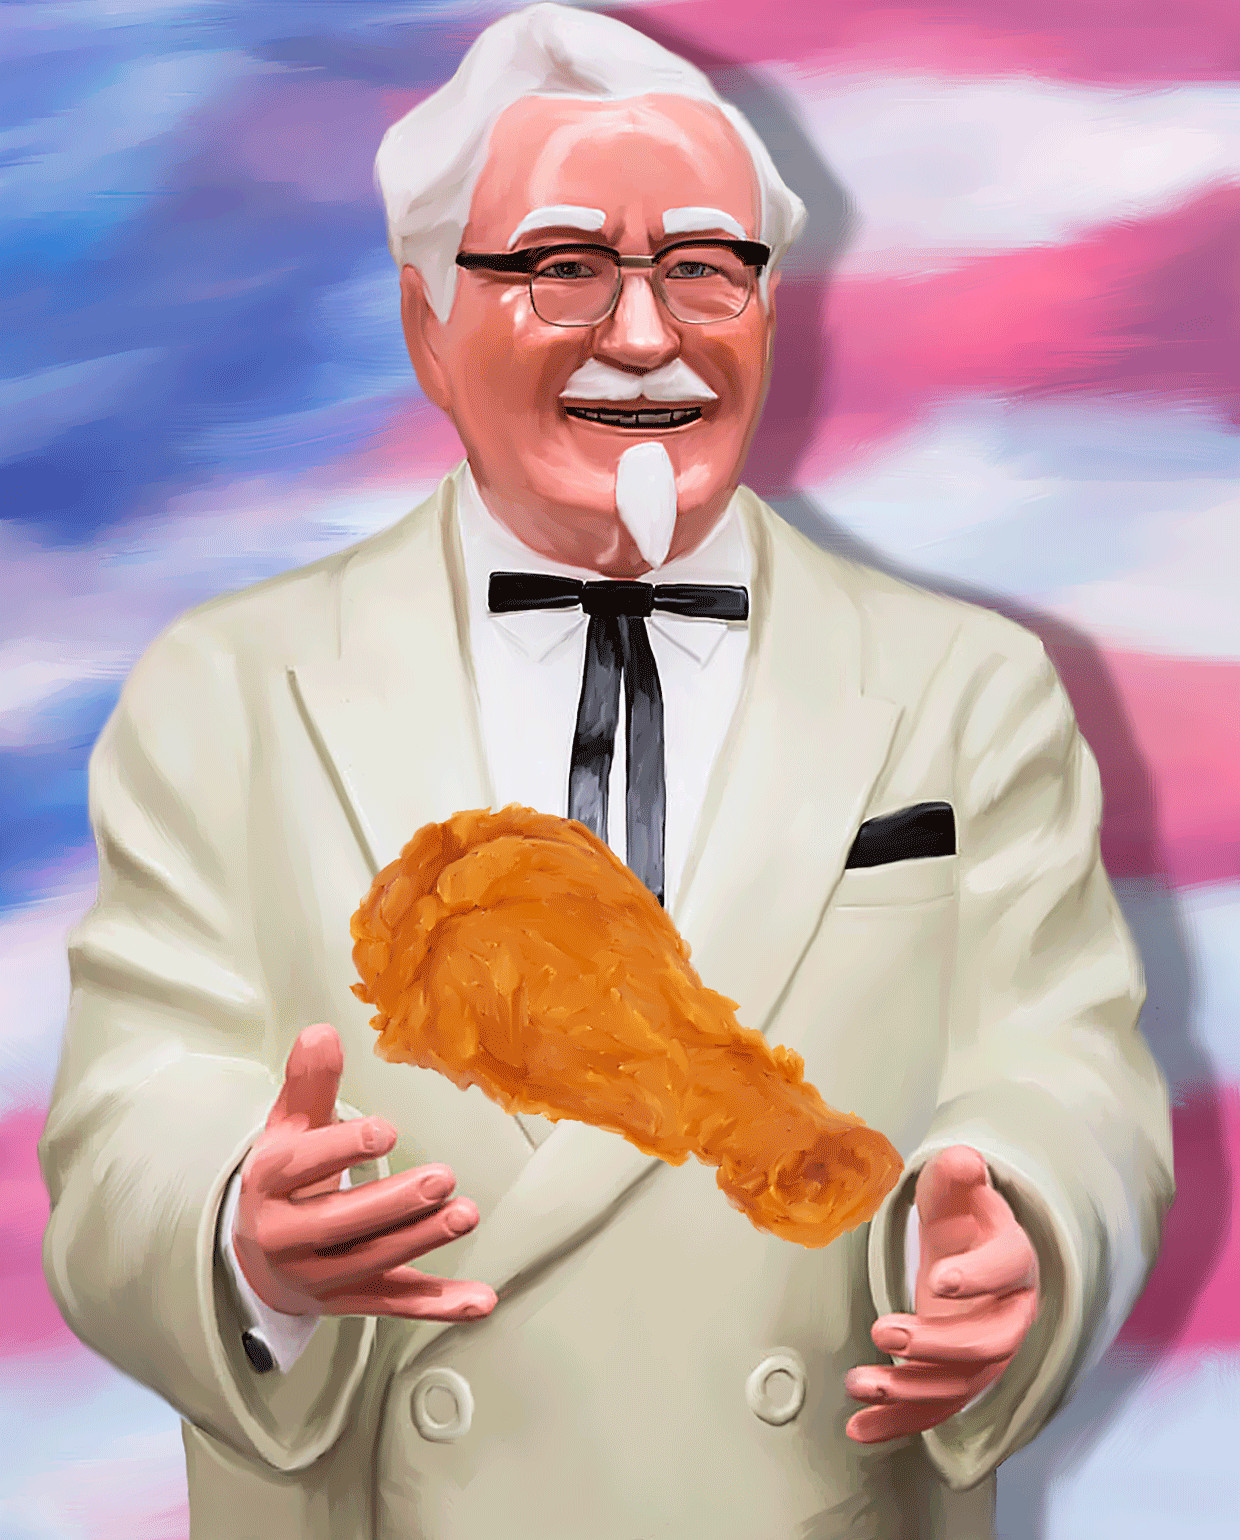 Fried Chicken Gif
 Kfc animation colonel sanders GIF on GIFER by Nikor